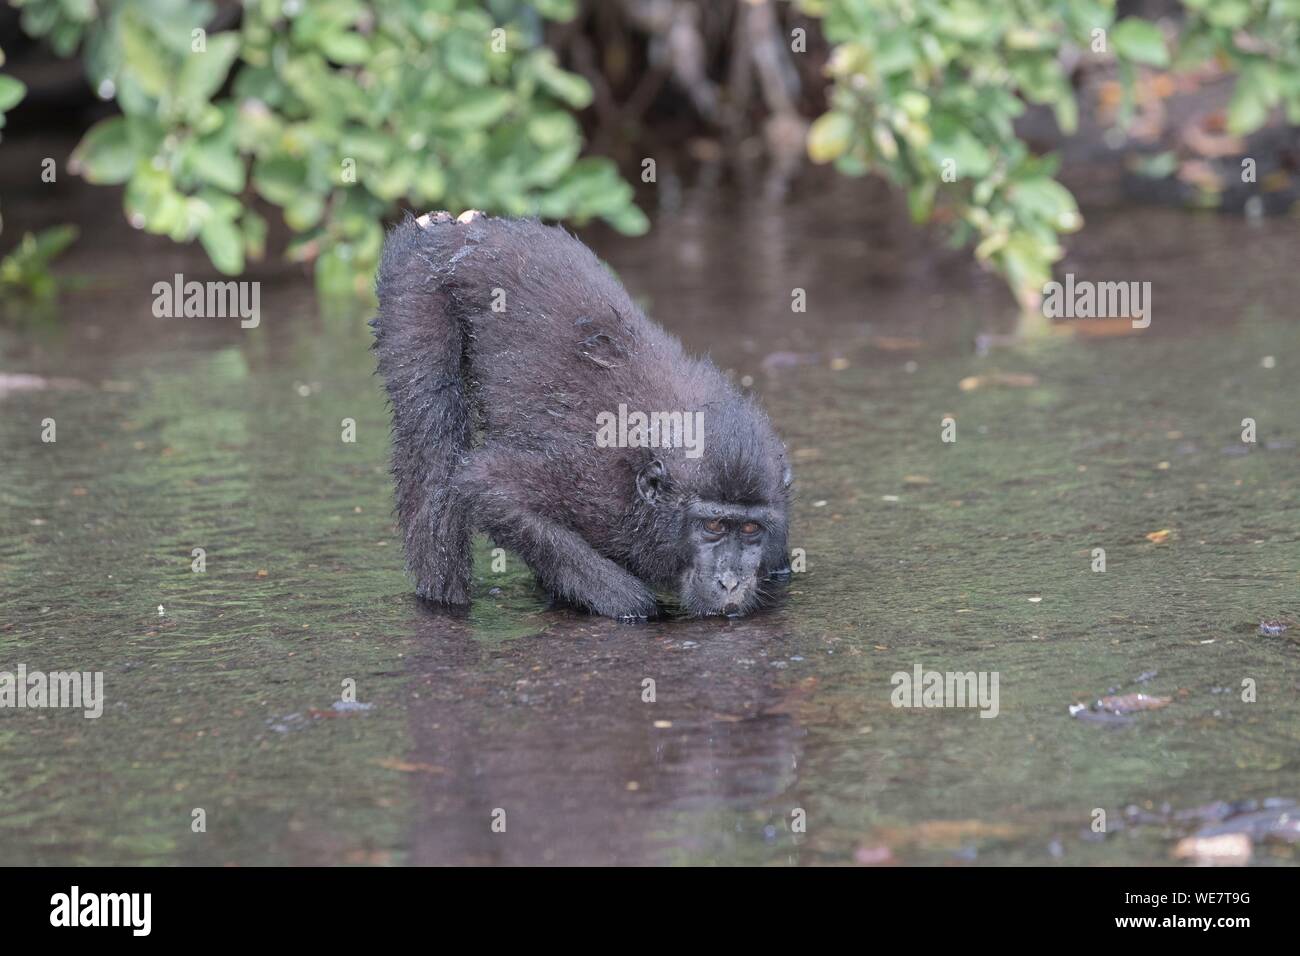 Indonesia, Celebes, Sulawesi, Tangkoko National Park, Celebes crested macaque or crested black macaque, Sulawesi crested macaque, or the black ape (Macaca nigra), in the river, drinking Stock Photo